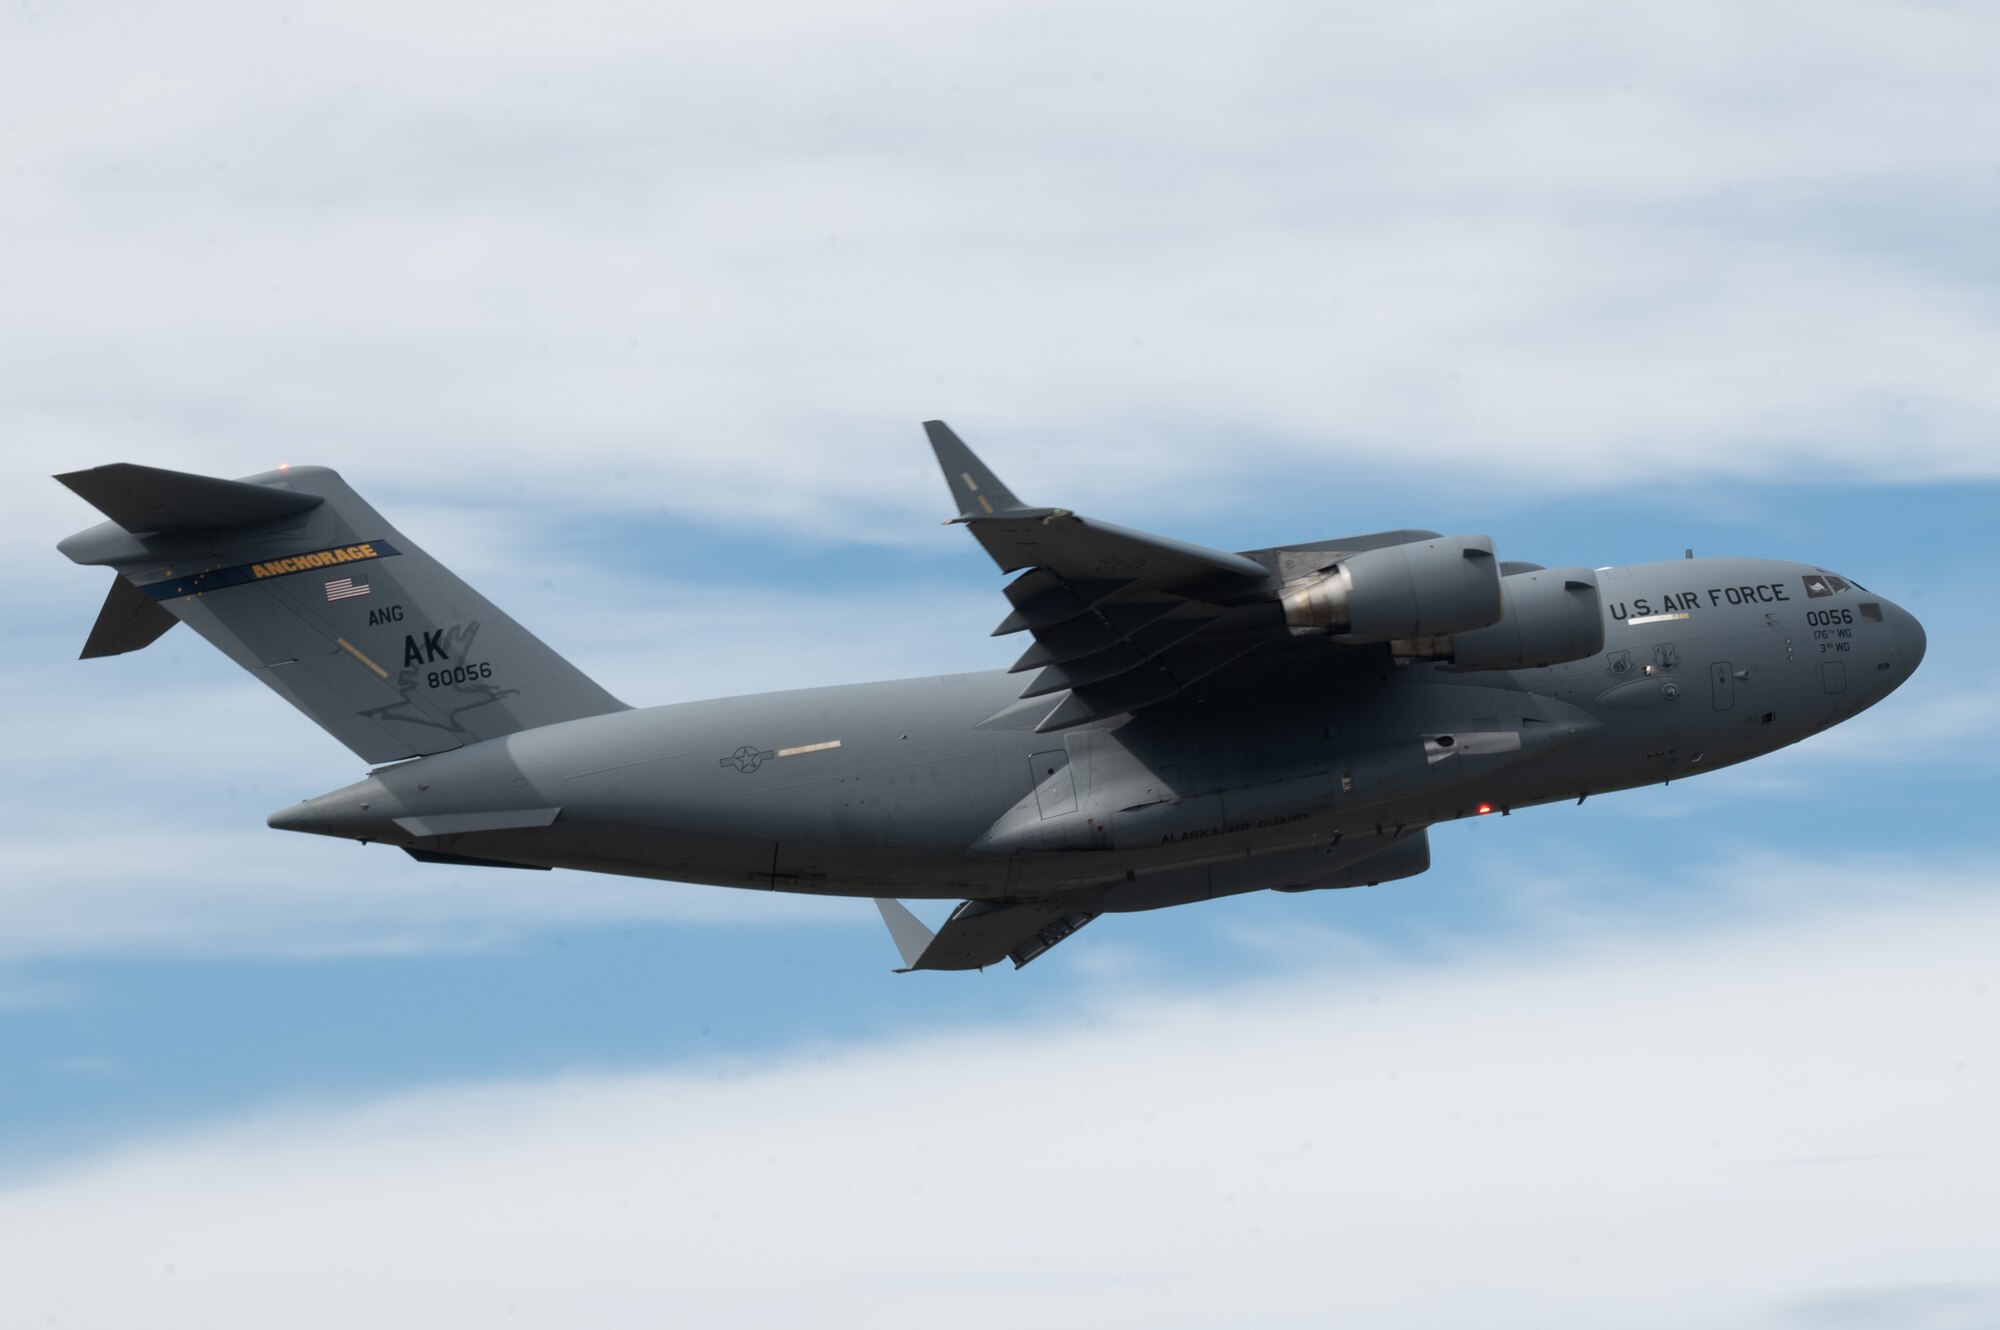 A C-17 Globemaster III assigned to the Pacific Air Forces demonstration team at Joint Base Pearl Harbor-Hickam, Hawaii takes off during the 2021 Arctic Lightning Airshow on Eielson Air Force Base, Alaska, July 30, 2021.